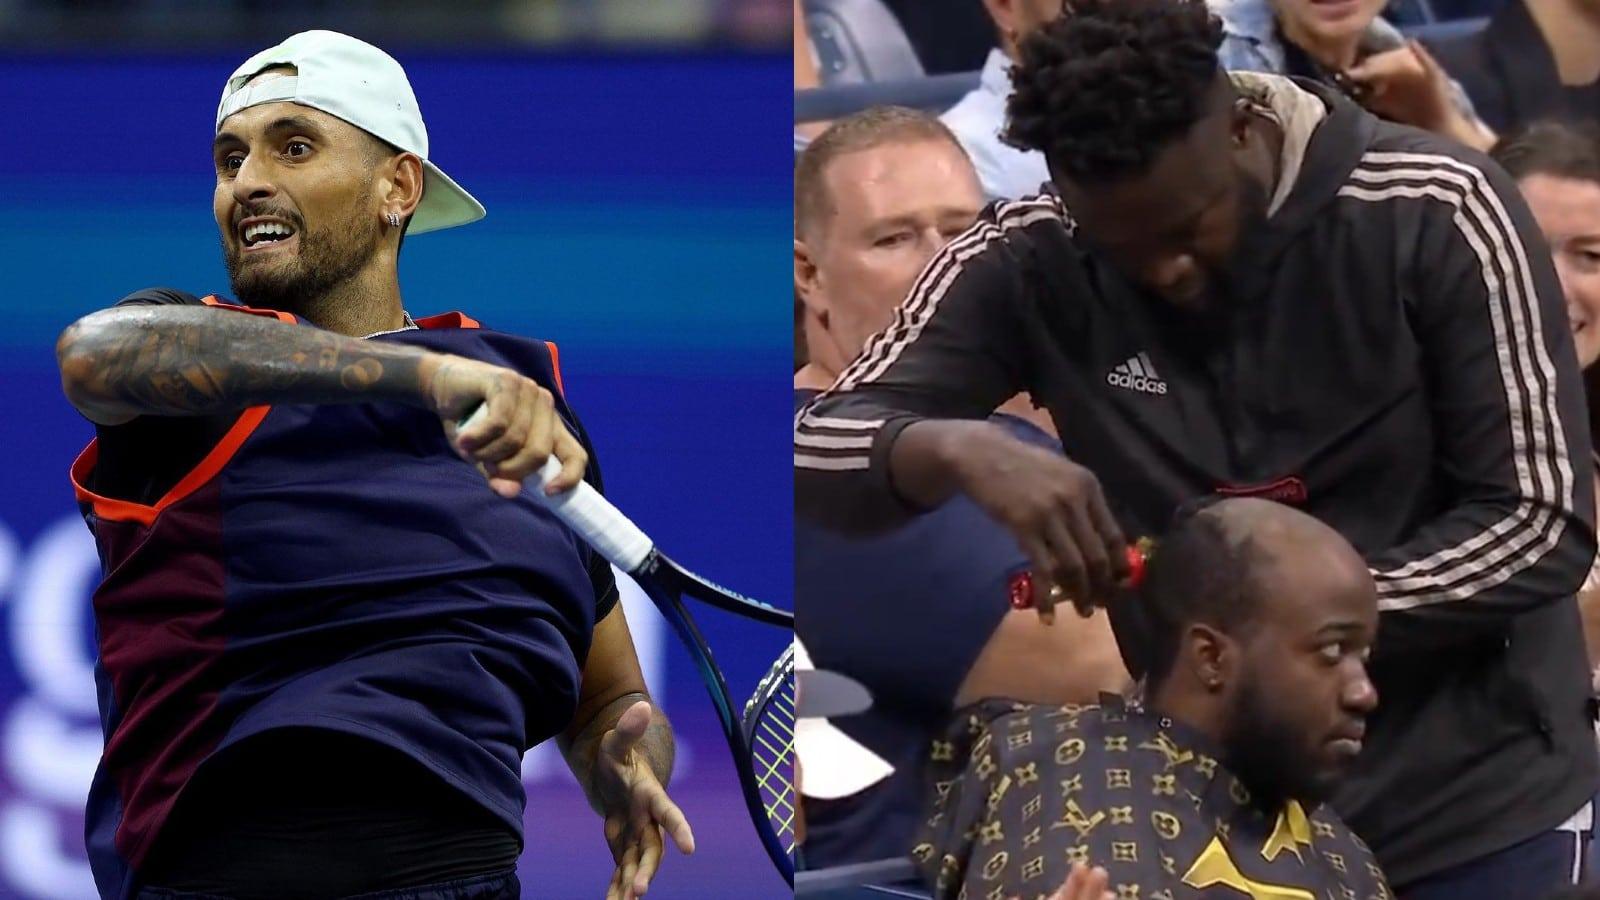 JiDion got a haircut at the US Open.